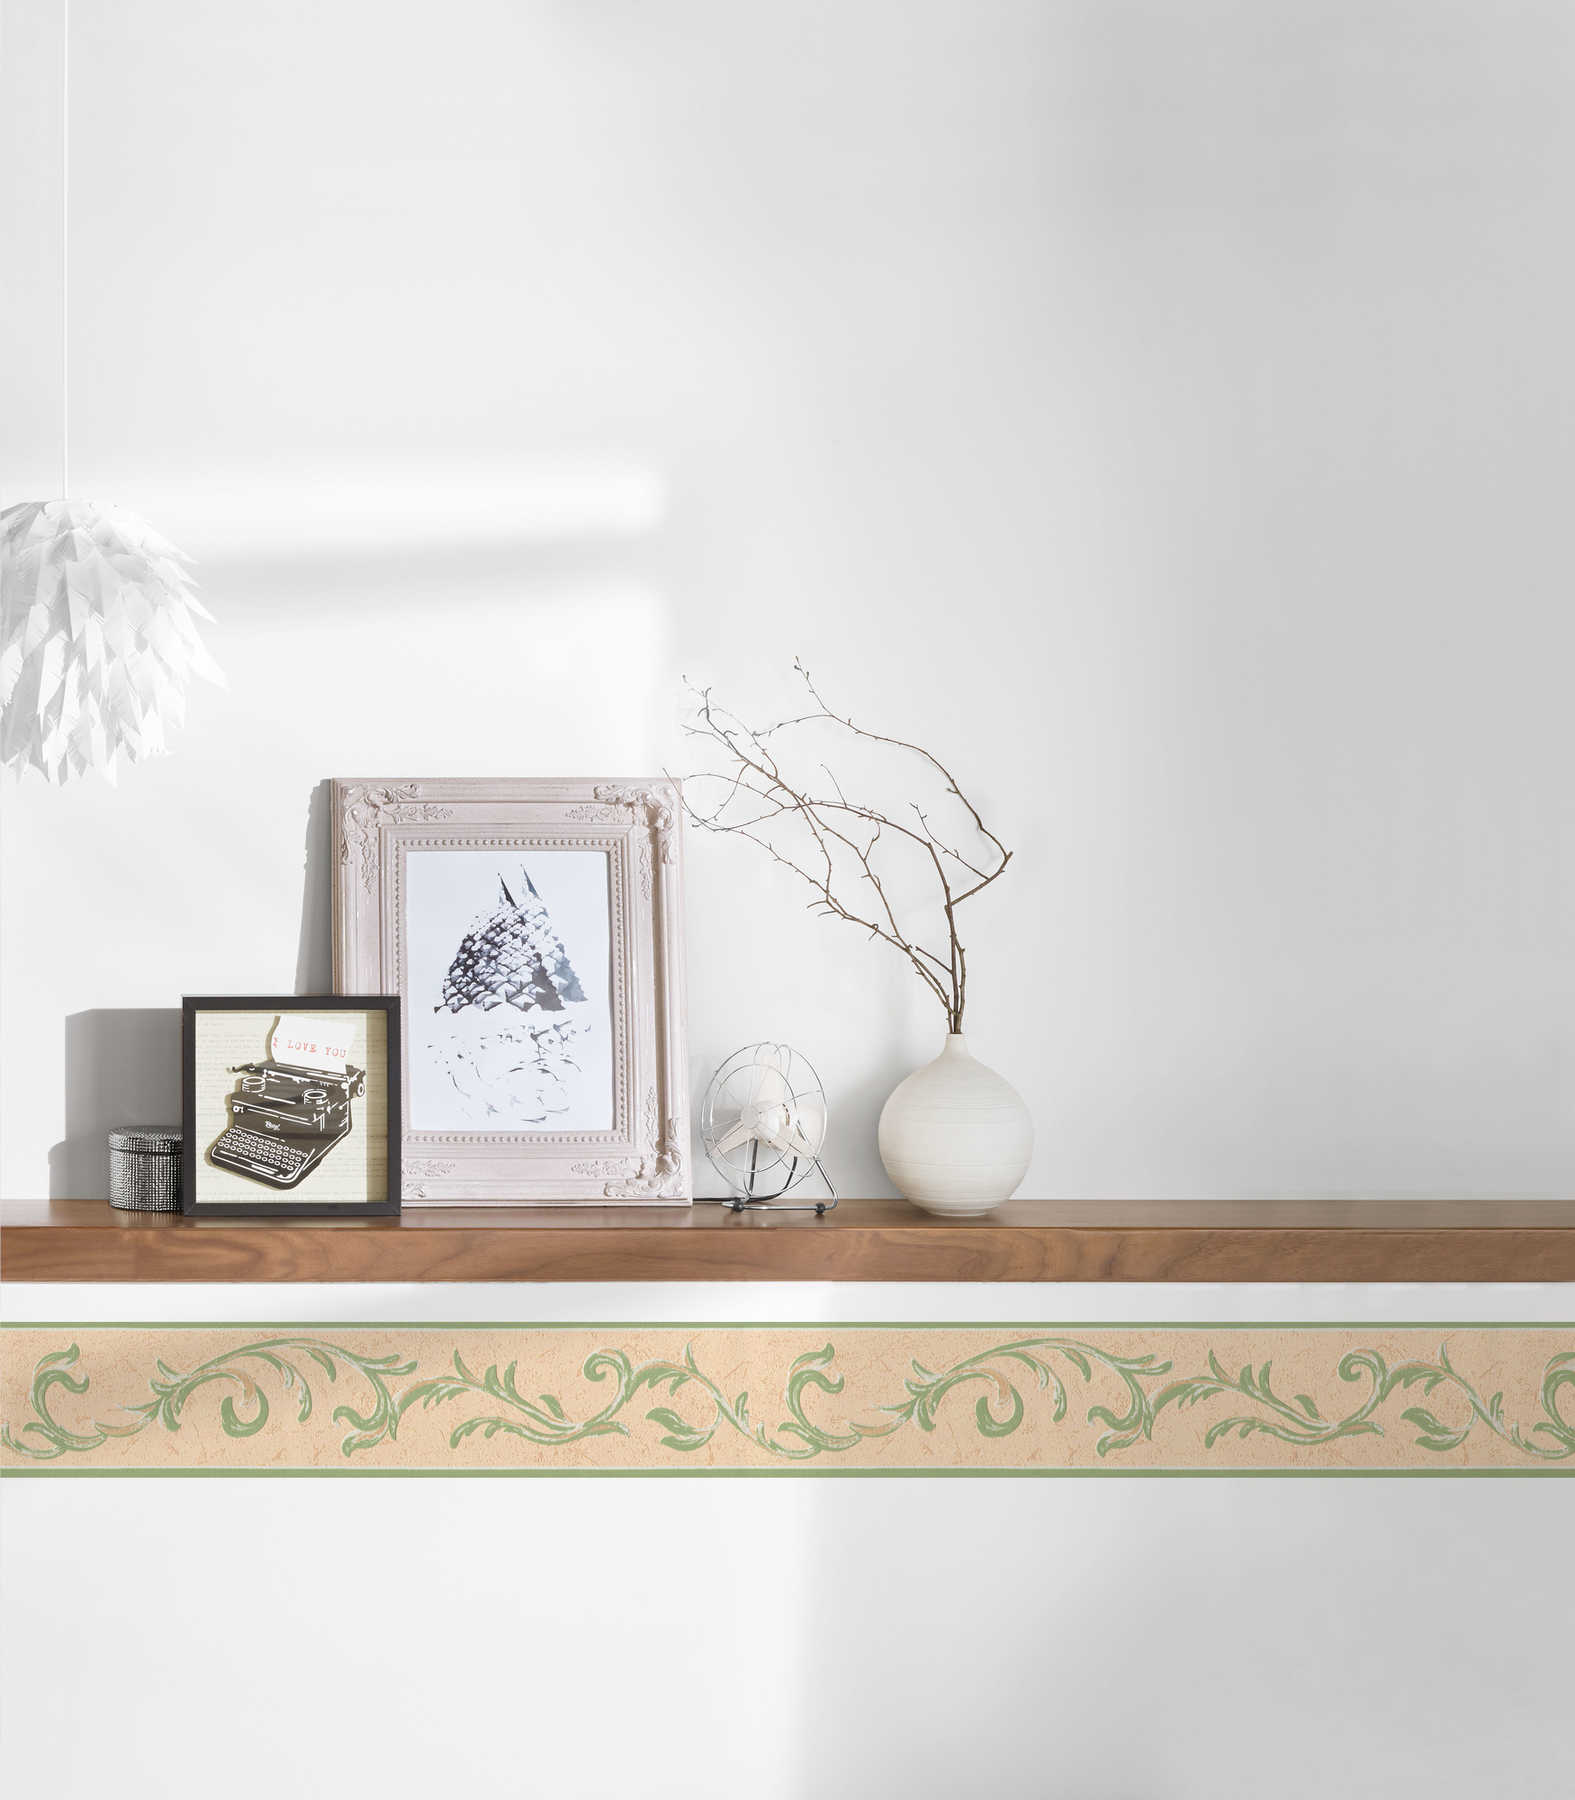             Wallpaper border with floral ornament & plaster look - beige, green
        